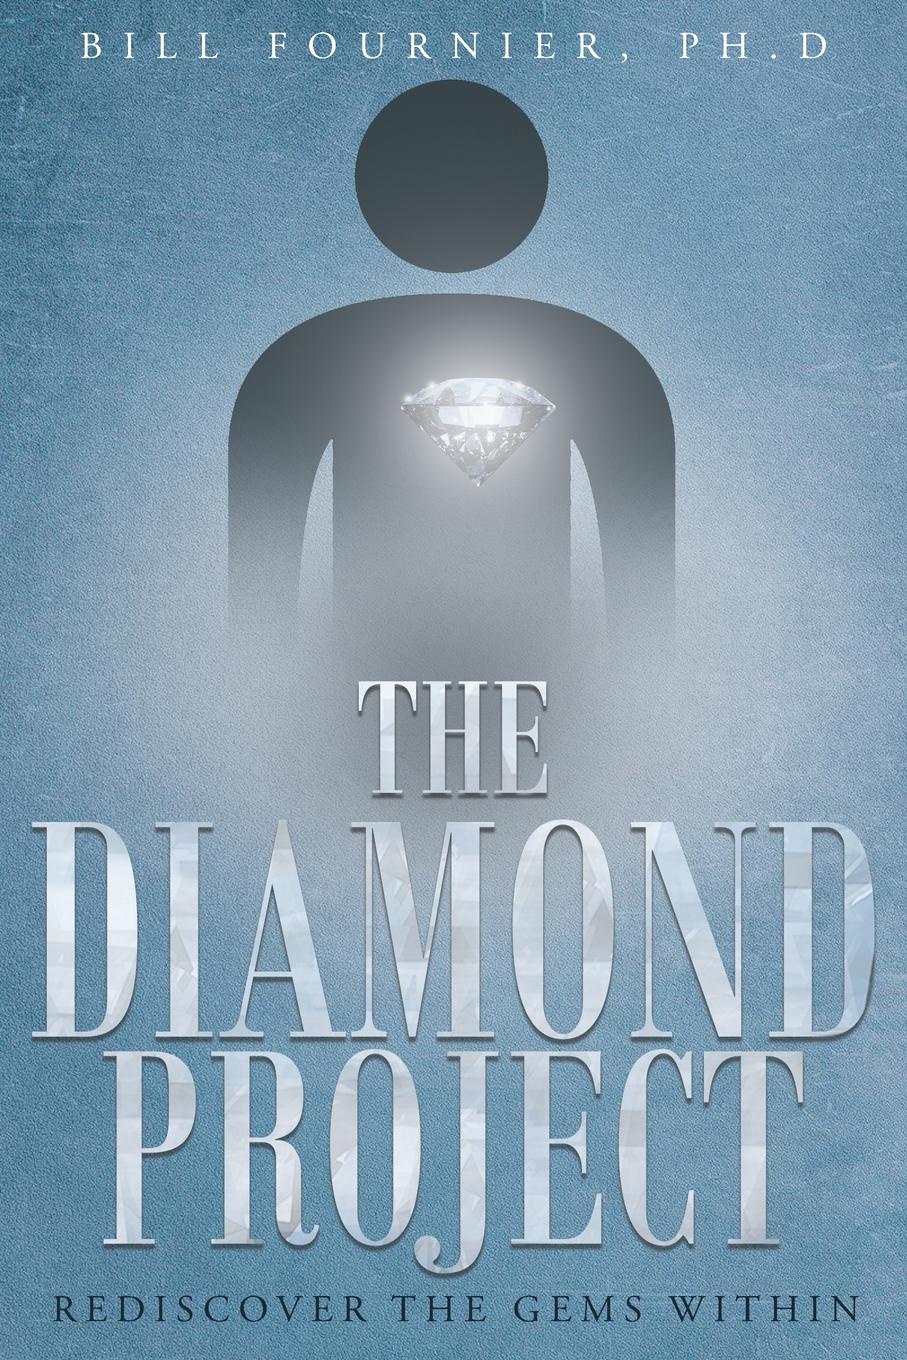 The Diamond Project. Rediscover the Gems Within